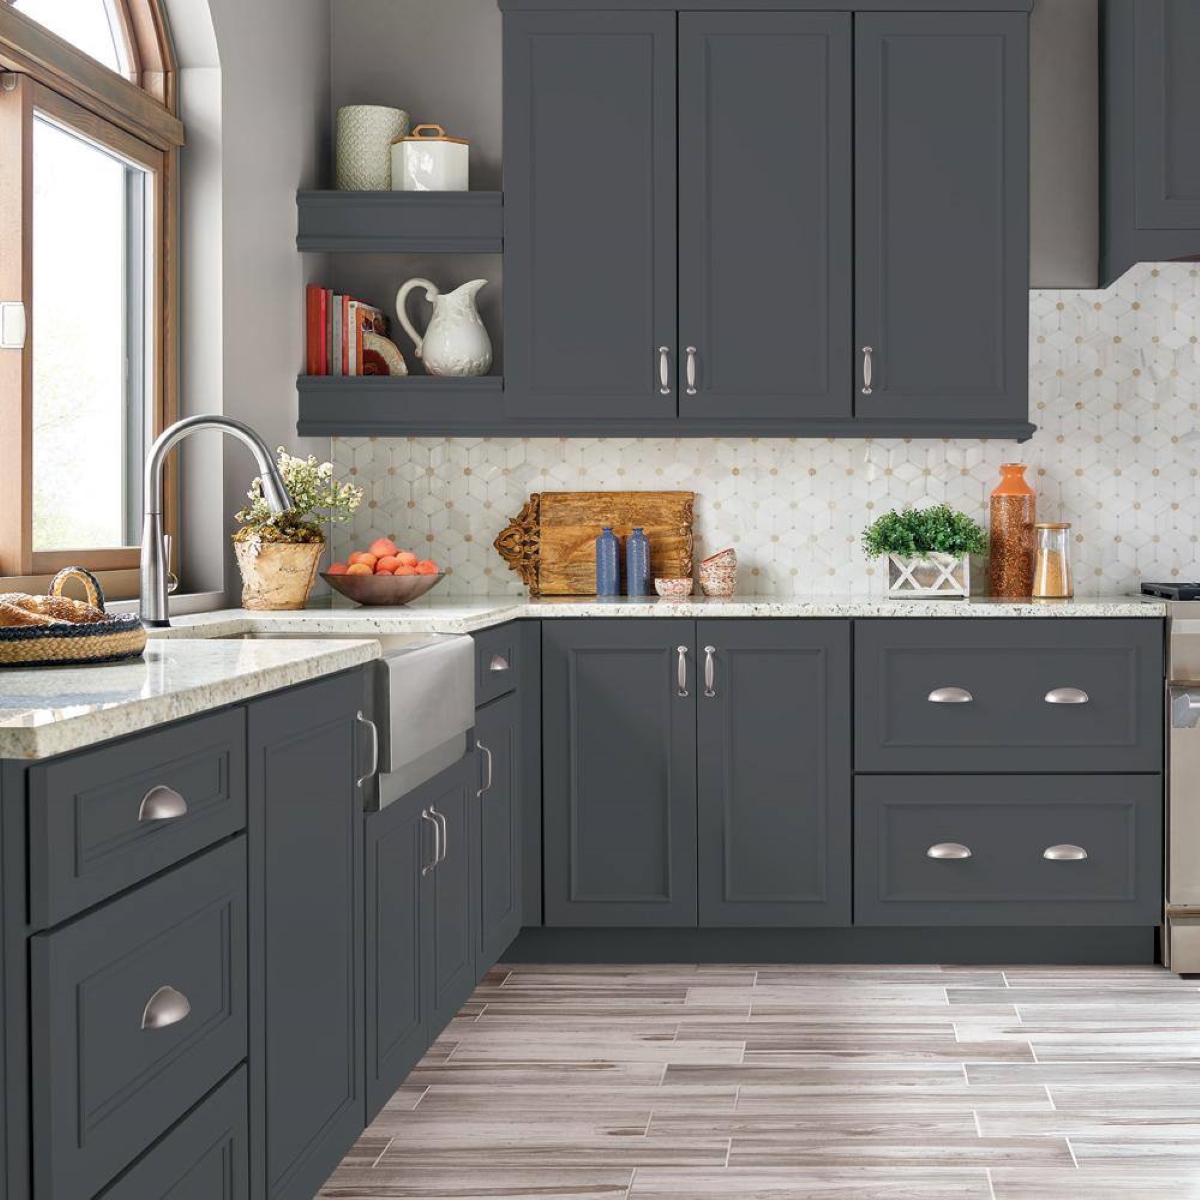 Kitchen cabinets in gray.